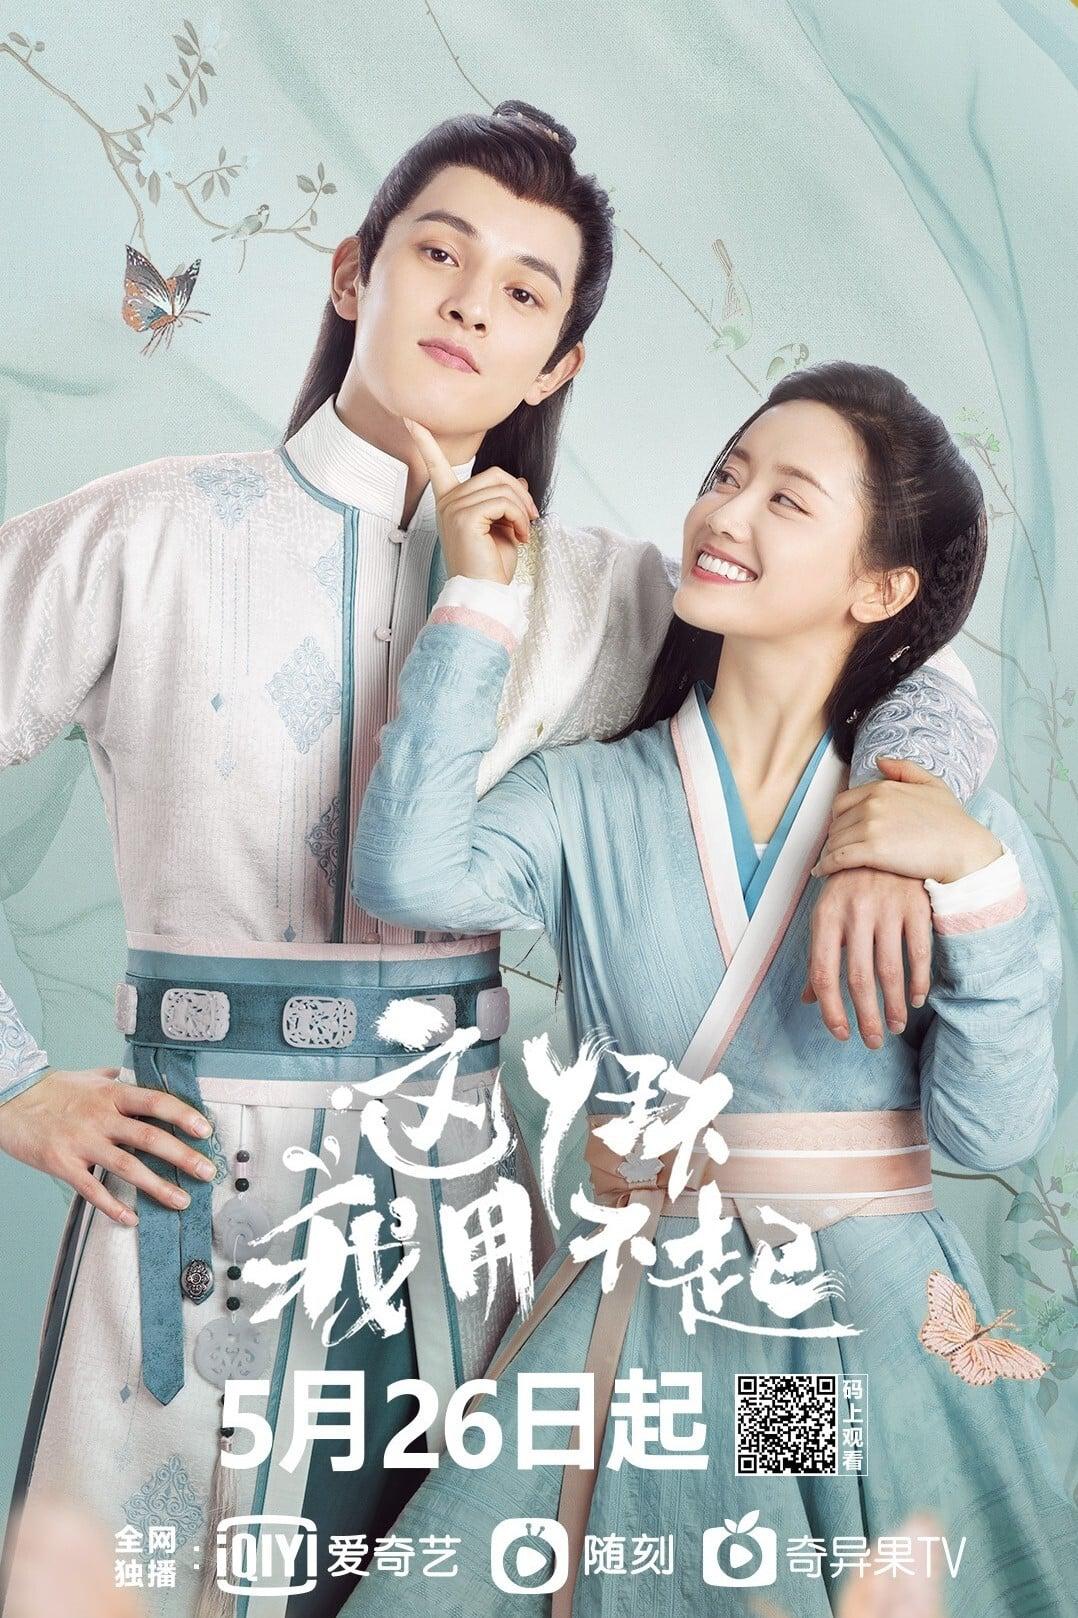 TV ratings for Maid Escort (这丫环我用不起) in Malaysia. iqiyi TV series